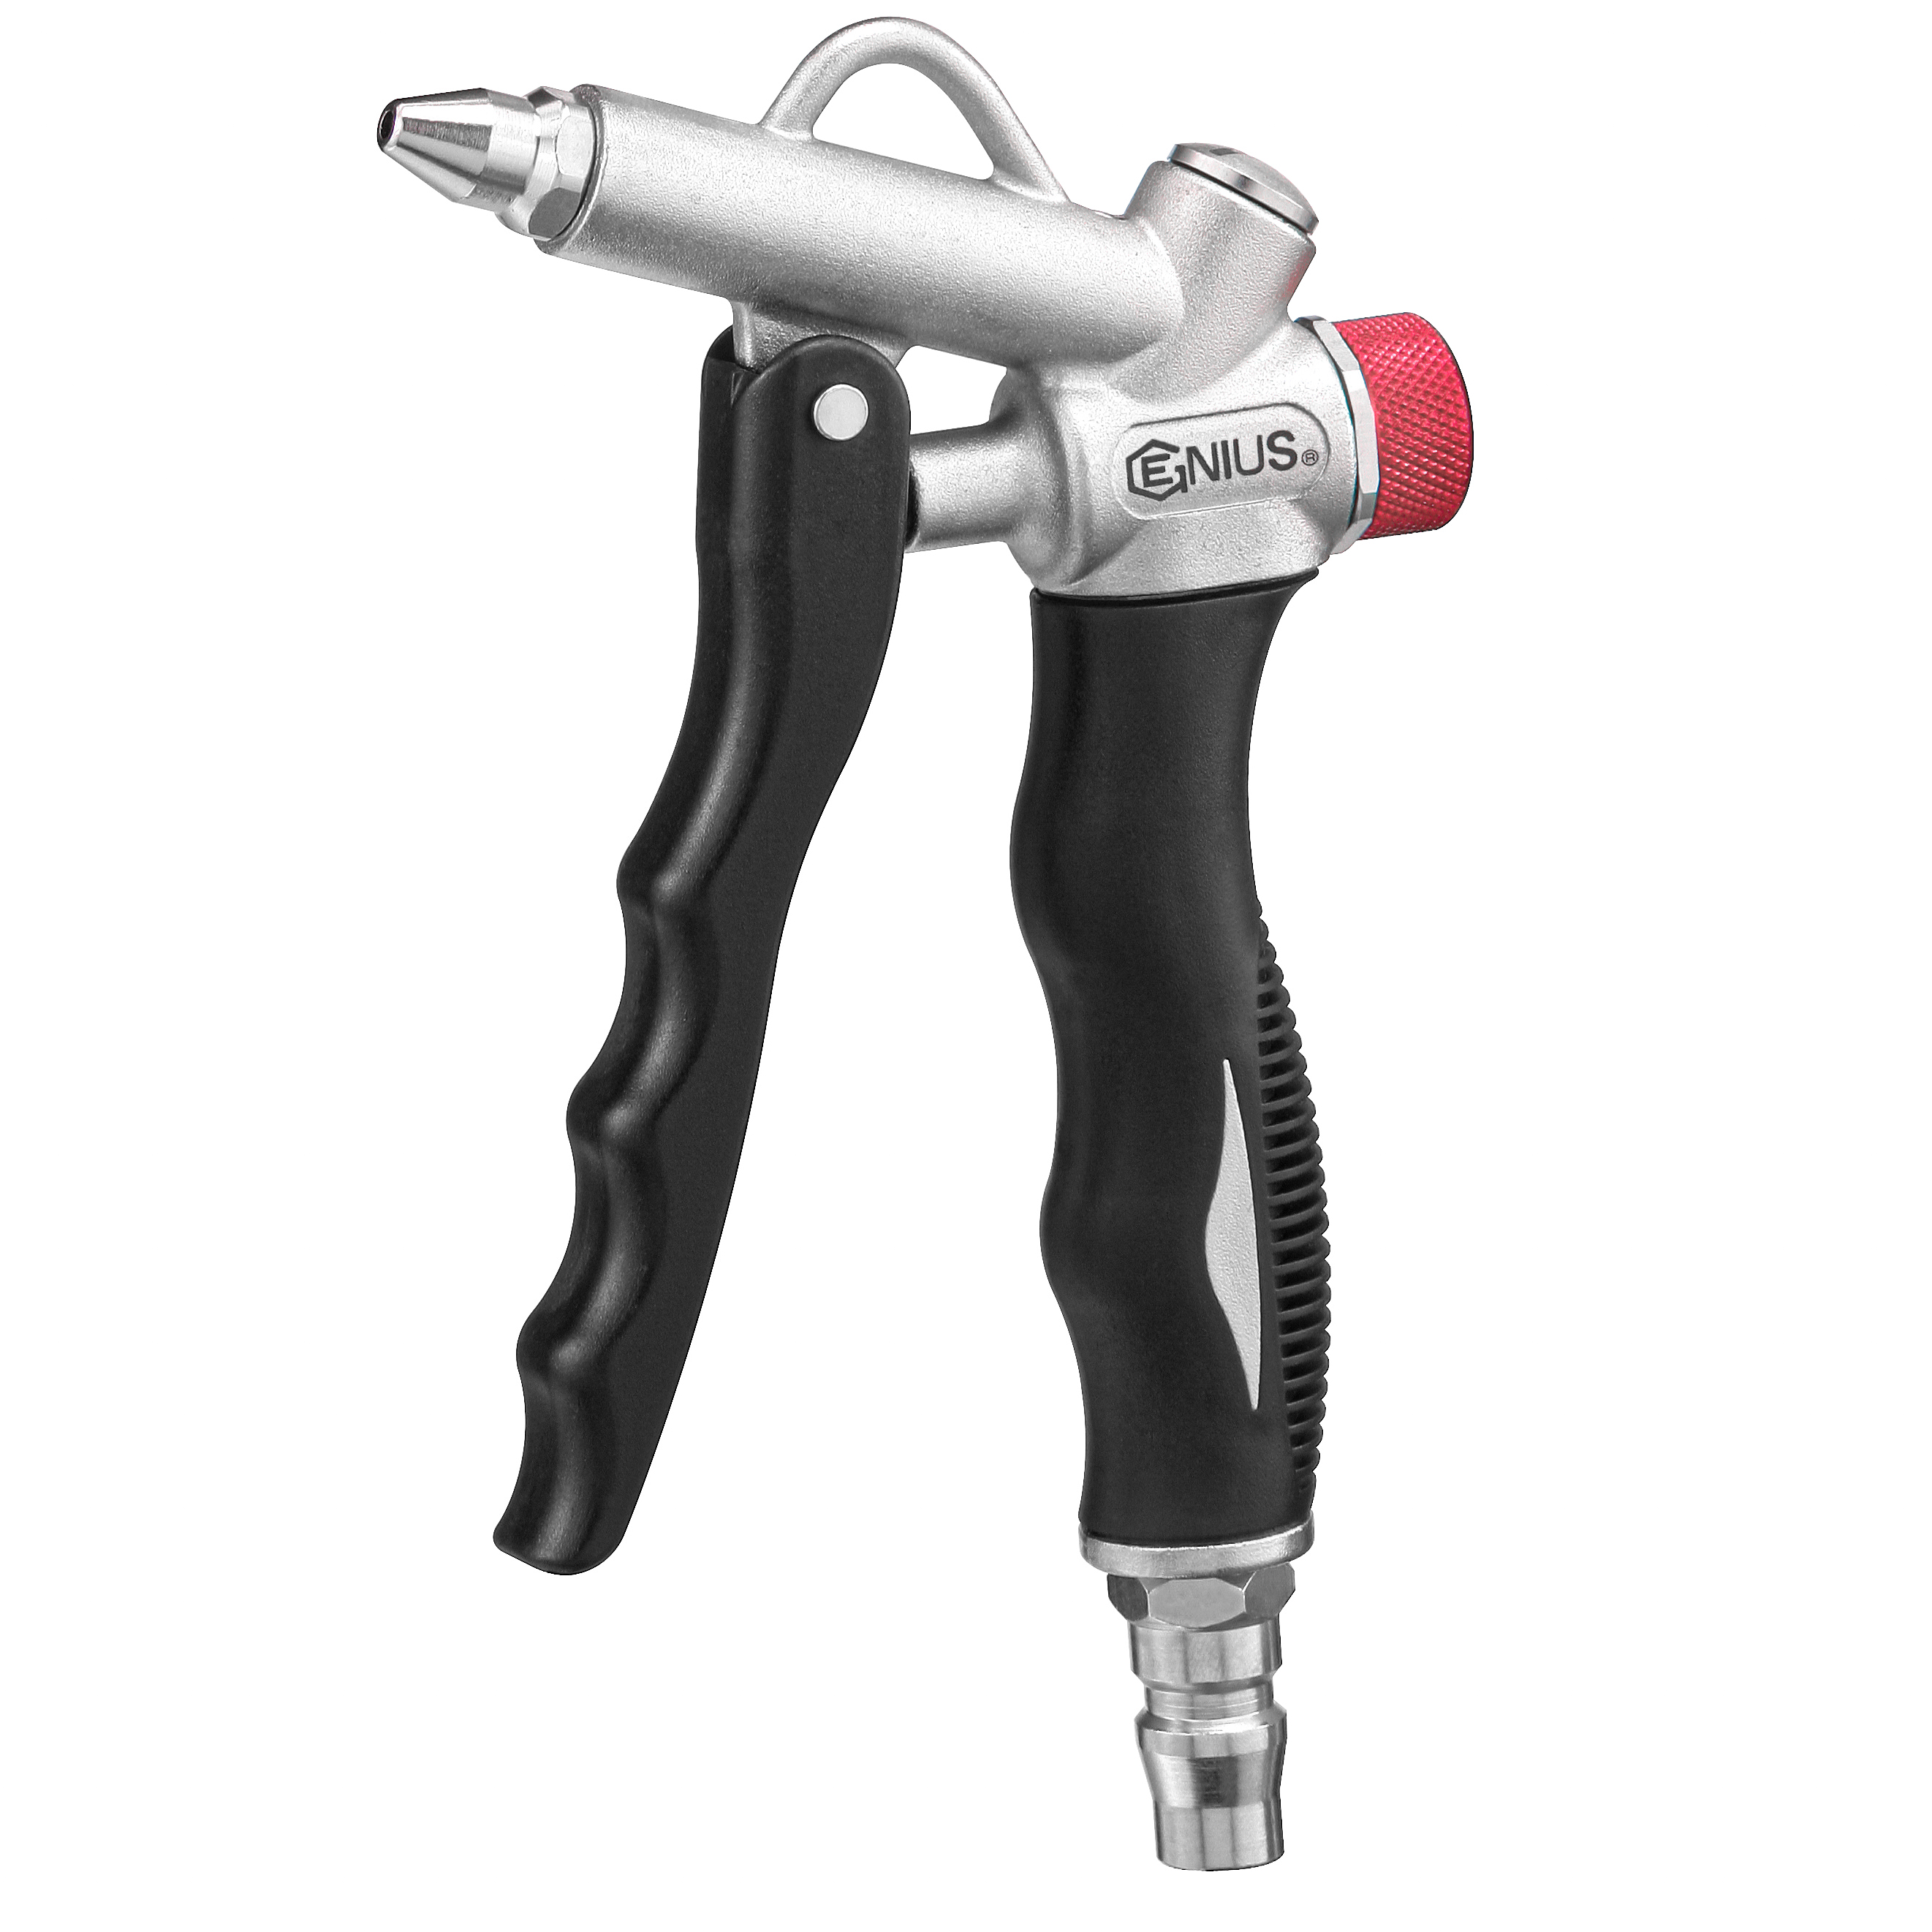 Air Blow Cun(2 in 1 Nozzle)